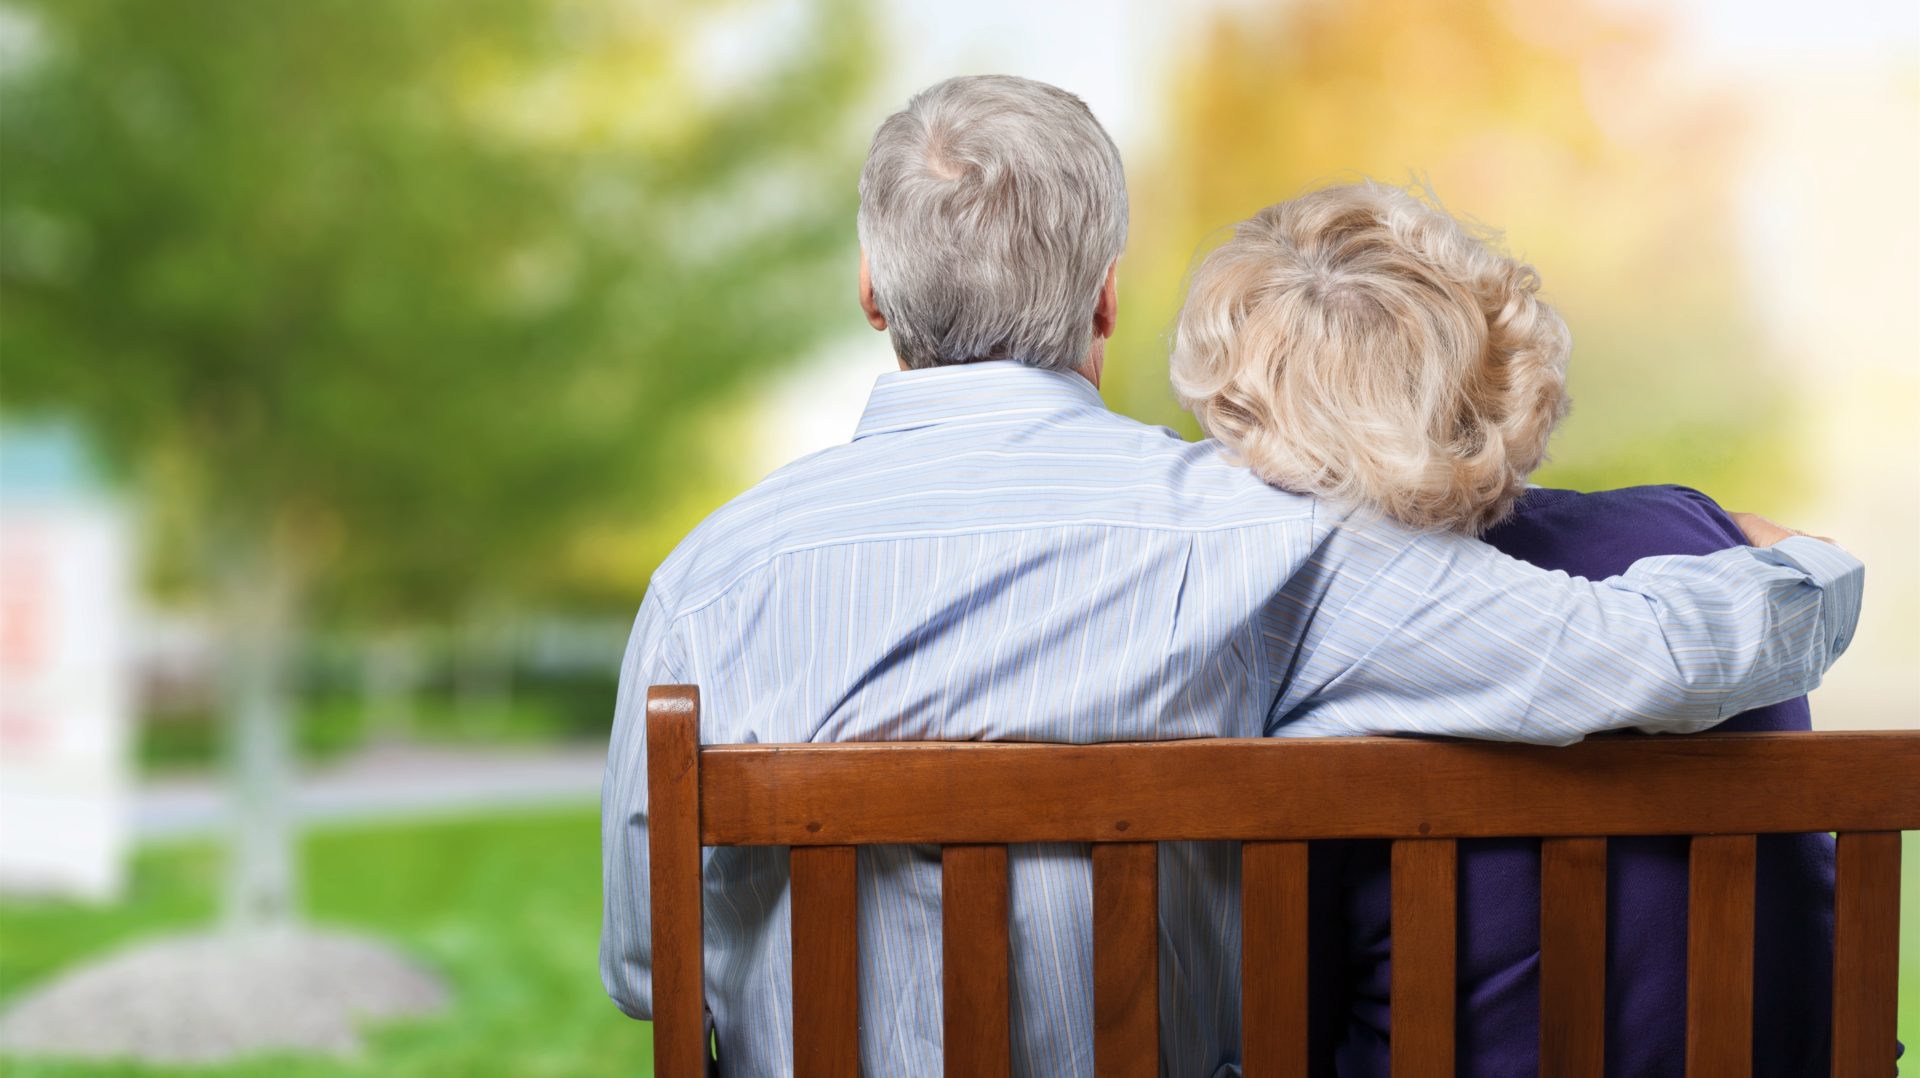 Finding the Right Minnesota Elder Lawyer to Plan for Long-Term Care Needs